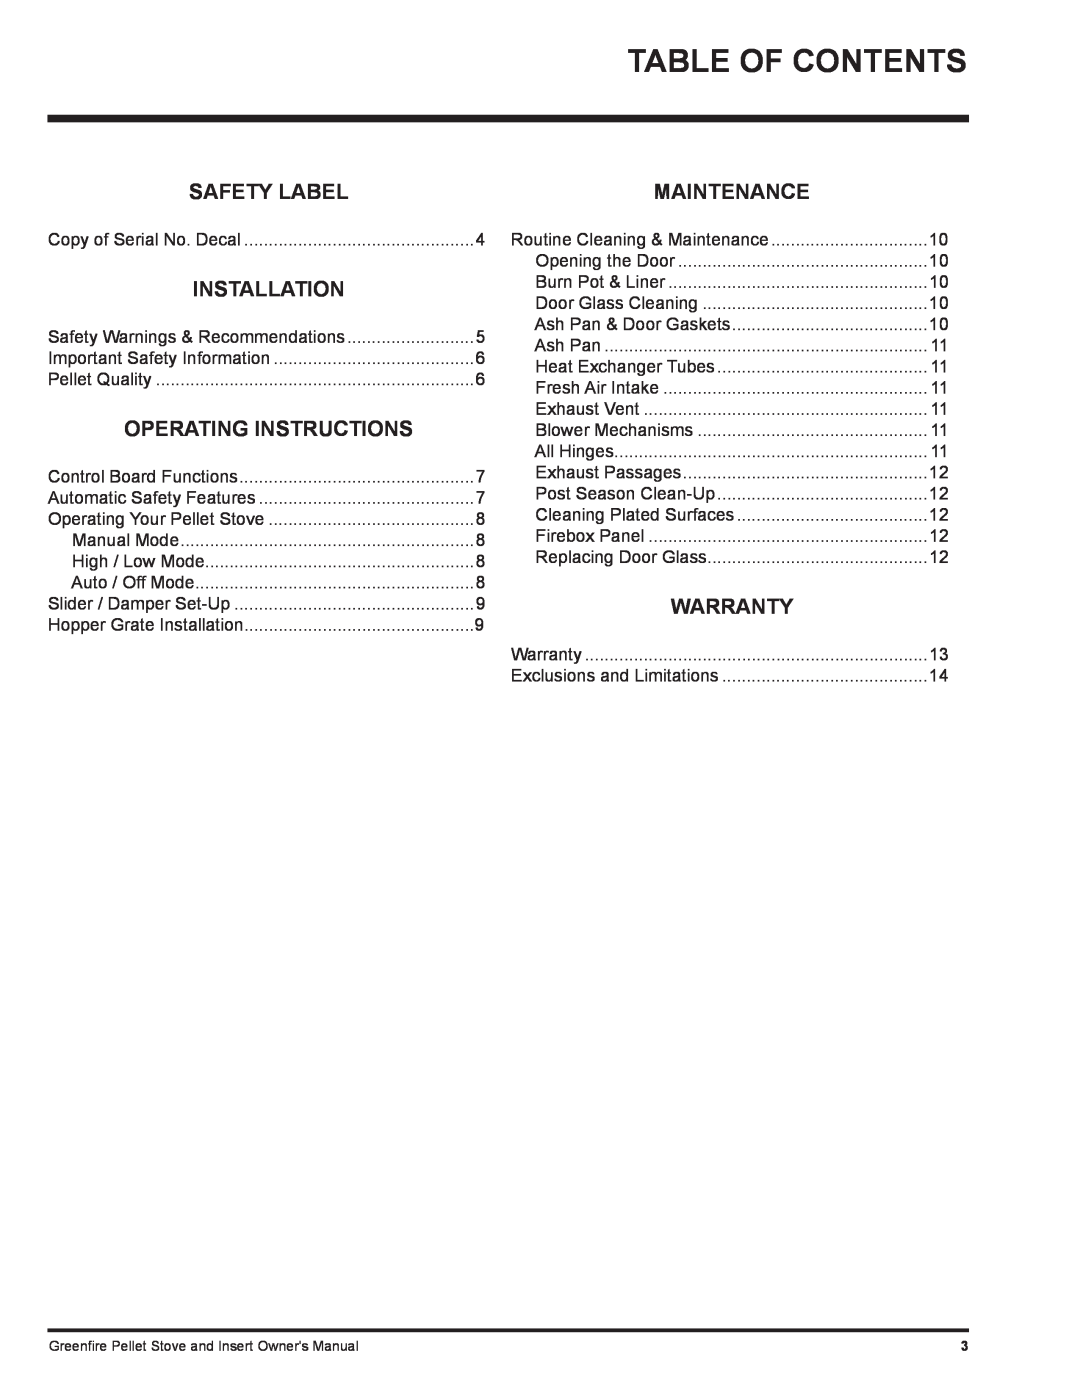 Regency GFI55 owner manual Table Of Contents, Maintenance, Warranty, Safety Label, Installation, Operating Instructions 